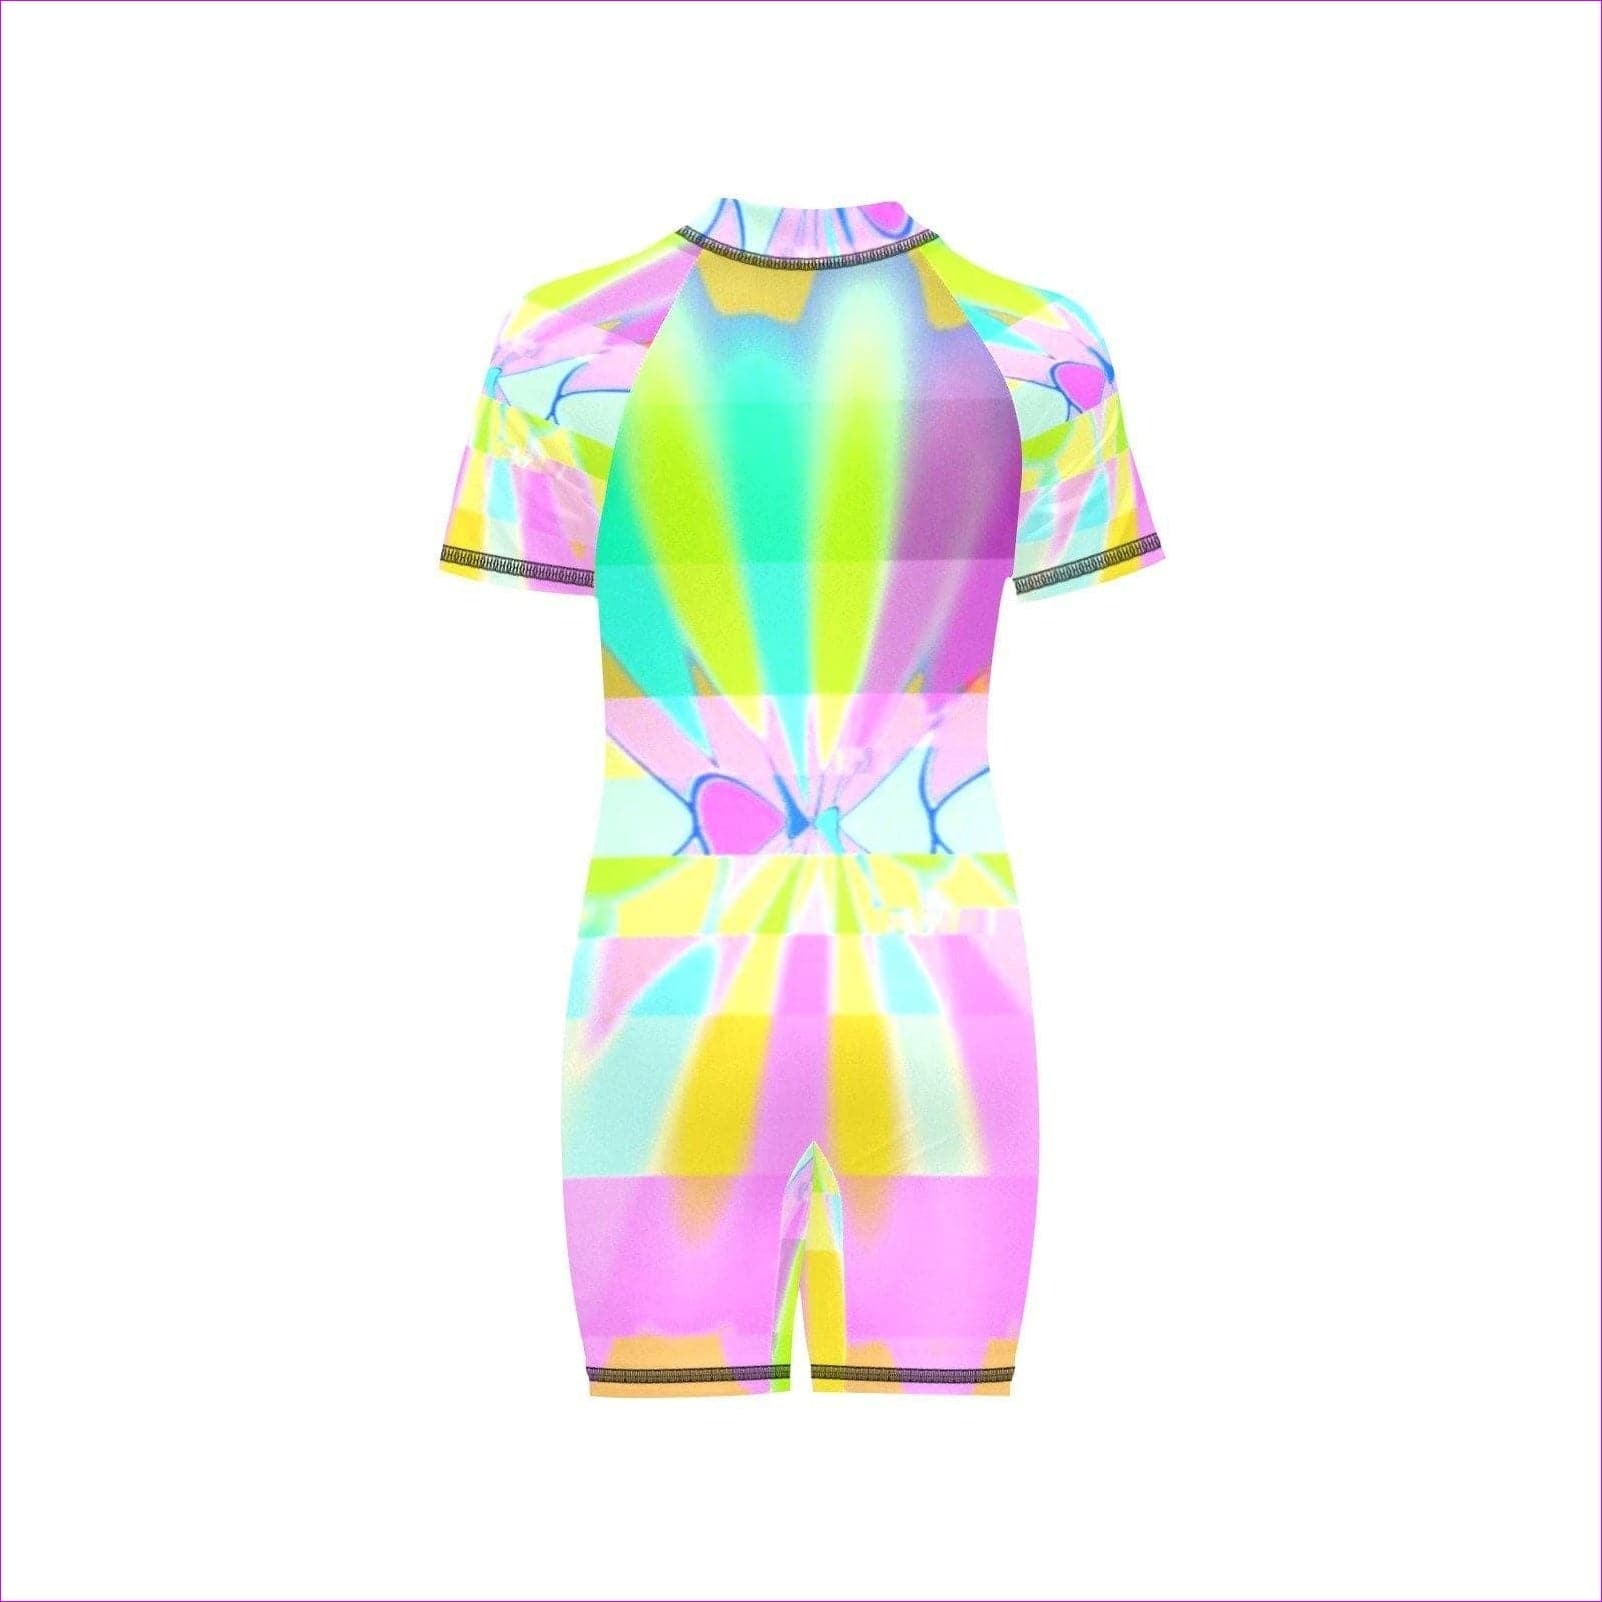 - Northern Lights Girls Short Sleeve One-Piece Swimsuit - kids swimsuit at TFC&H Co.